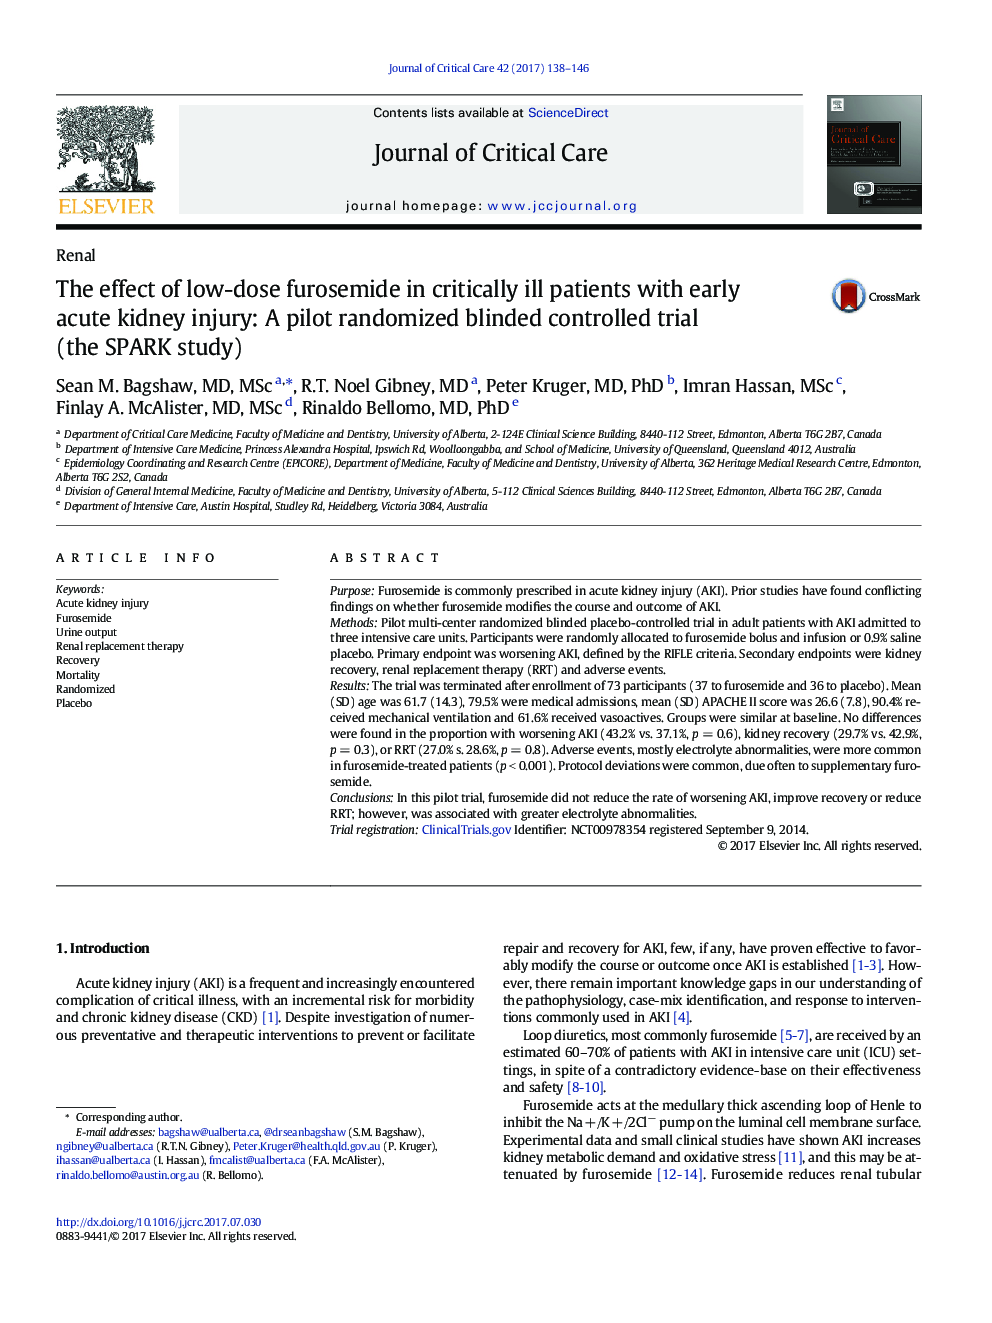 The effect of low-dose furosemide in critically ill patients with early acute kidney injury: A pilot randomized blinded controlled trial (the SPARK study)